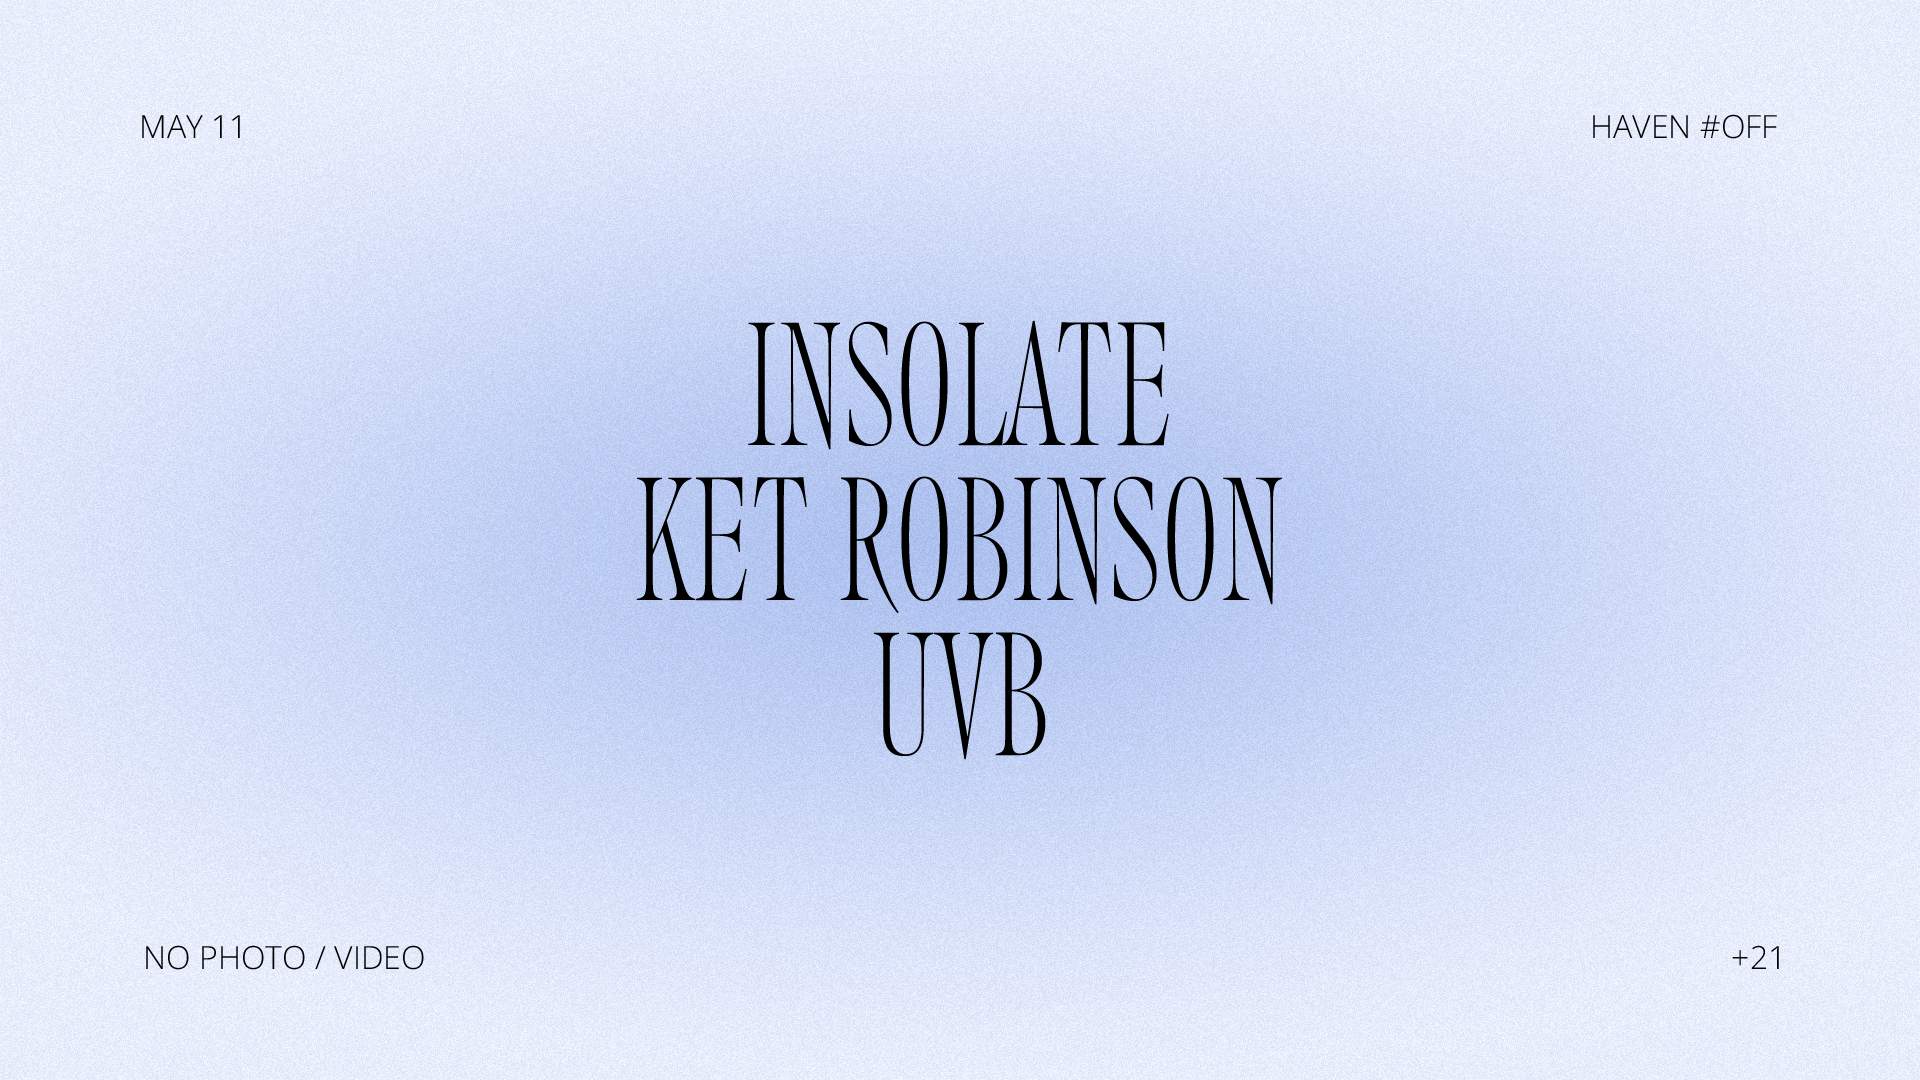 HAVEN #OFF • UVB, Insolate, Ket Robinson - フライヤー表